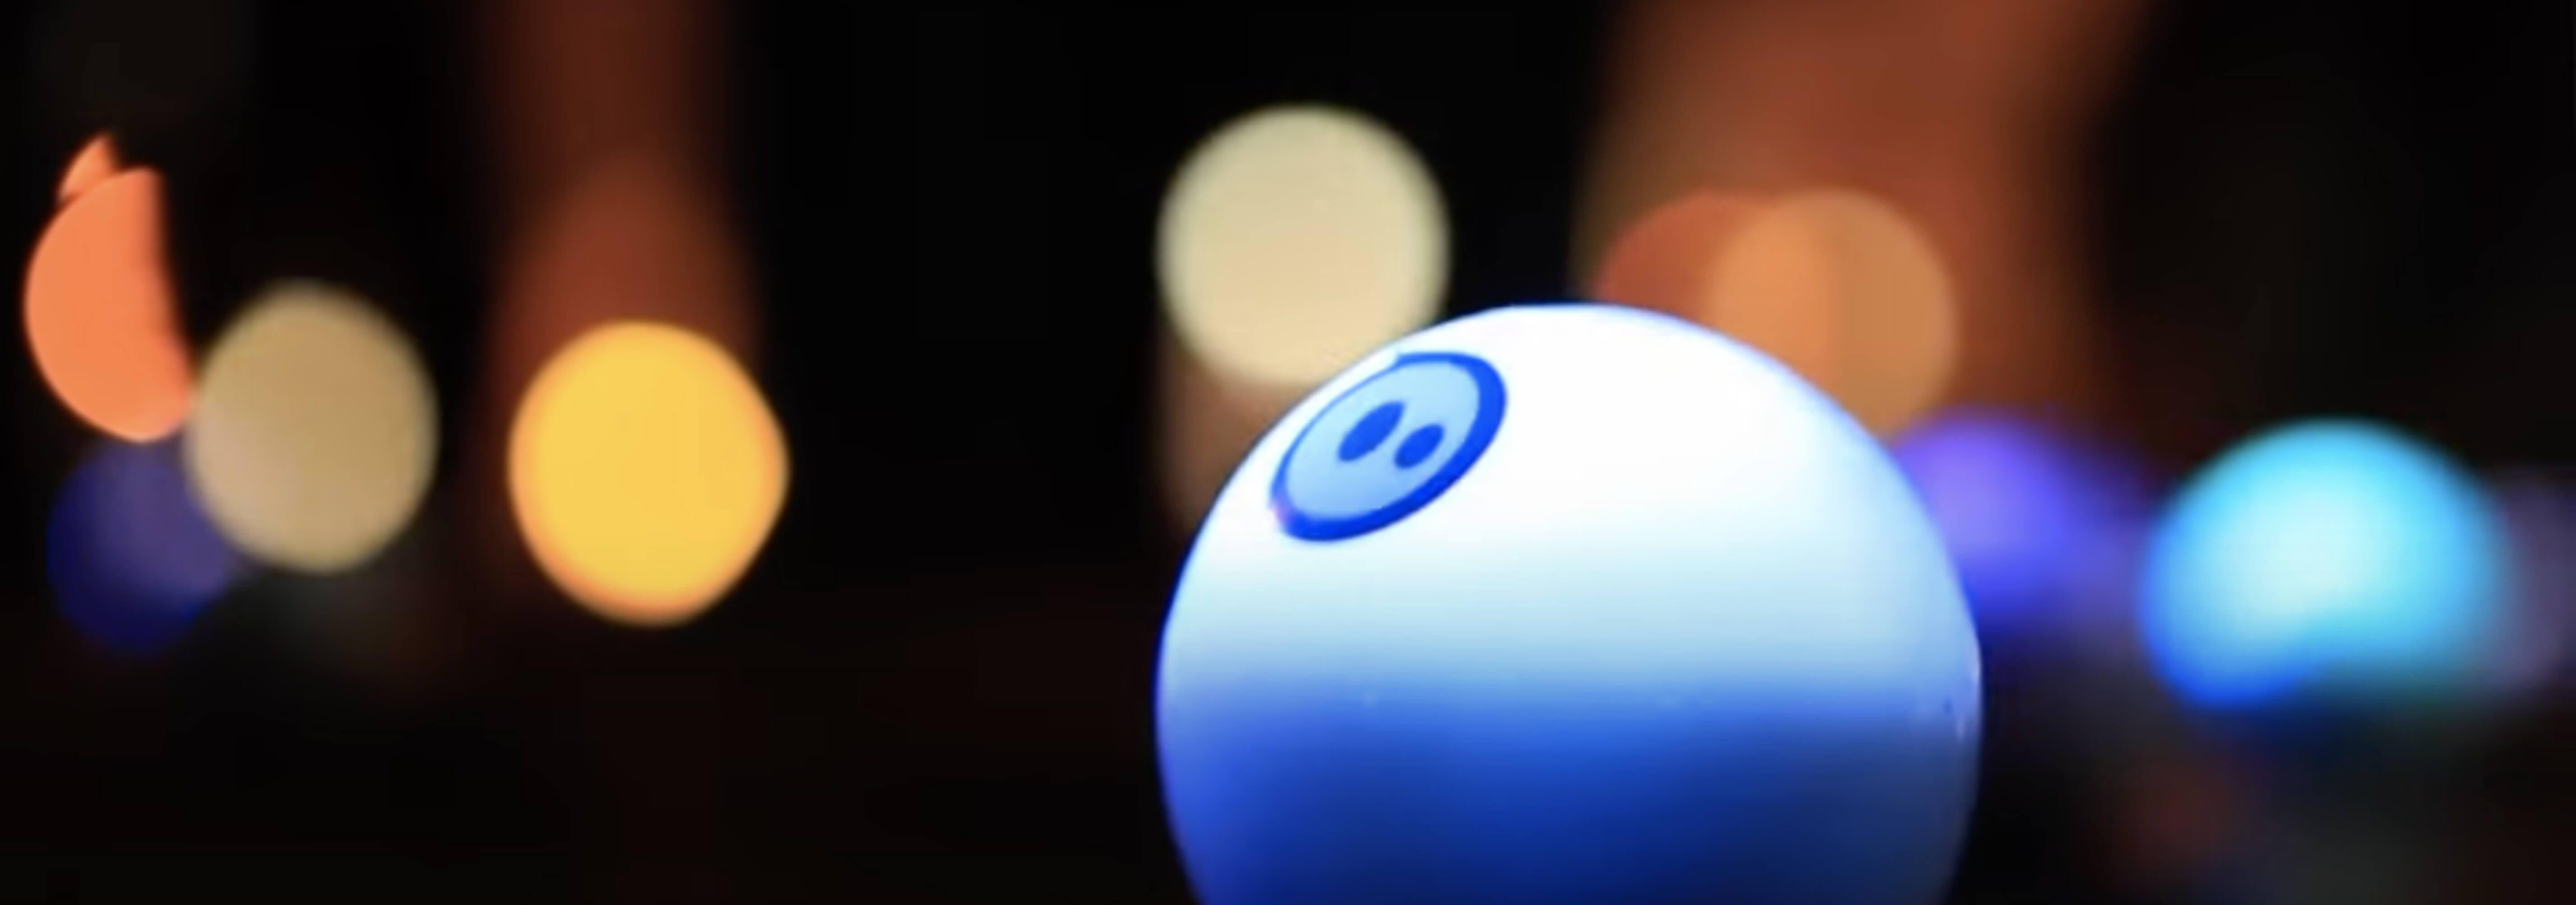 Awaken the Force with Kinect and Sphero